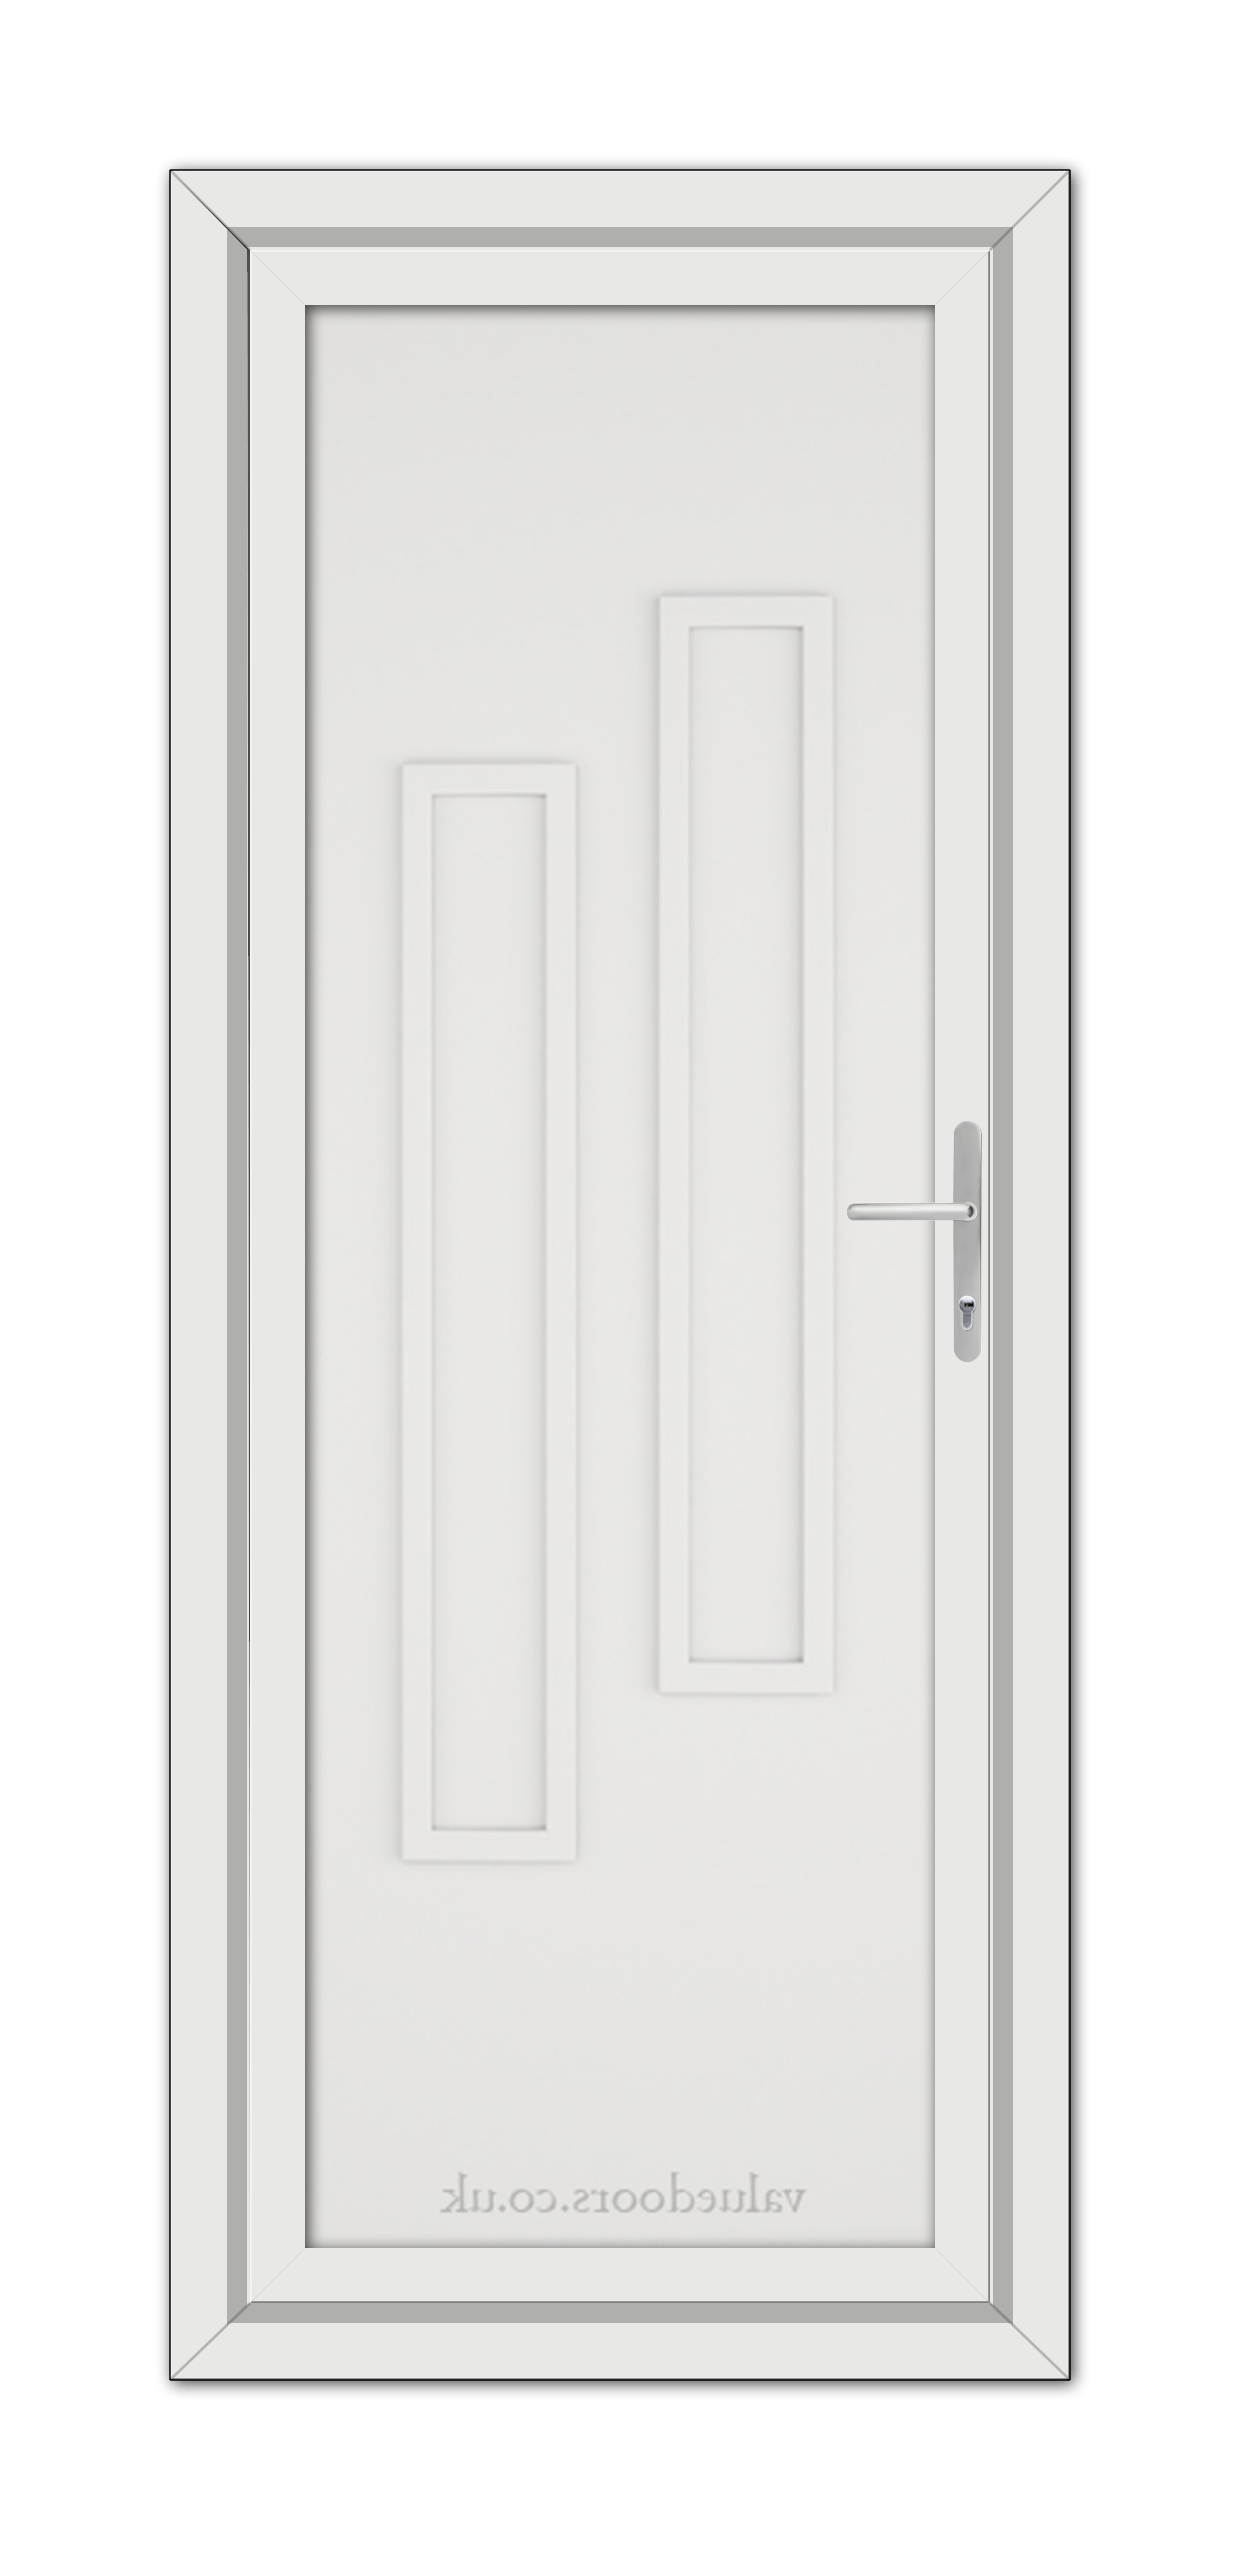 A White Modern 5082 Solid uPVC door with two vertical panels and a metallic handle, set within a simple frame.